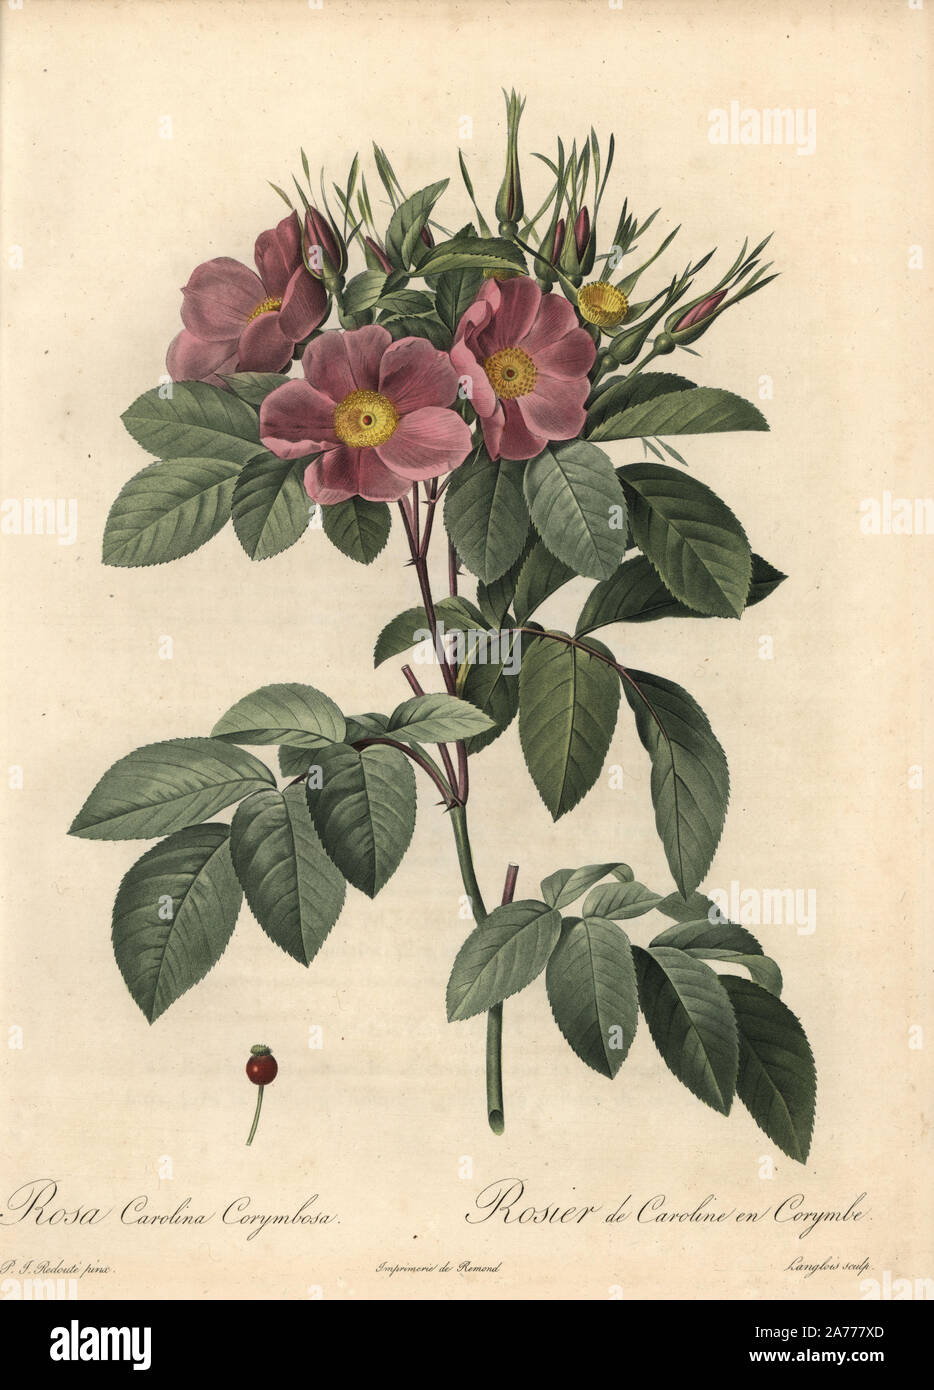 Corymbosa Carolina rose, Rosa carolina variety (Rosa carolina corymbosa). Handcoloured stipple copperplate engraving by Langlois after an illustration by Pierre-Joseph Redoute from 'Les Roses,' Firmin Didot, Paris, 1817. Stock Photo